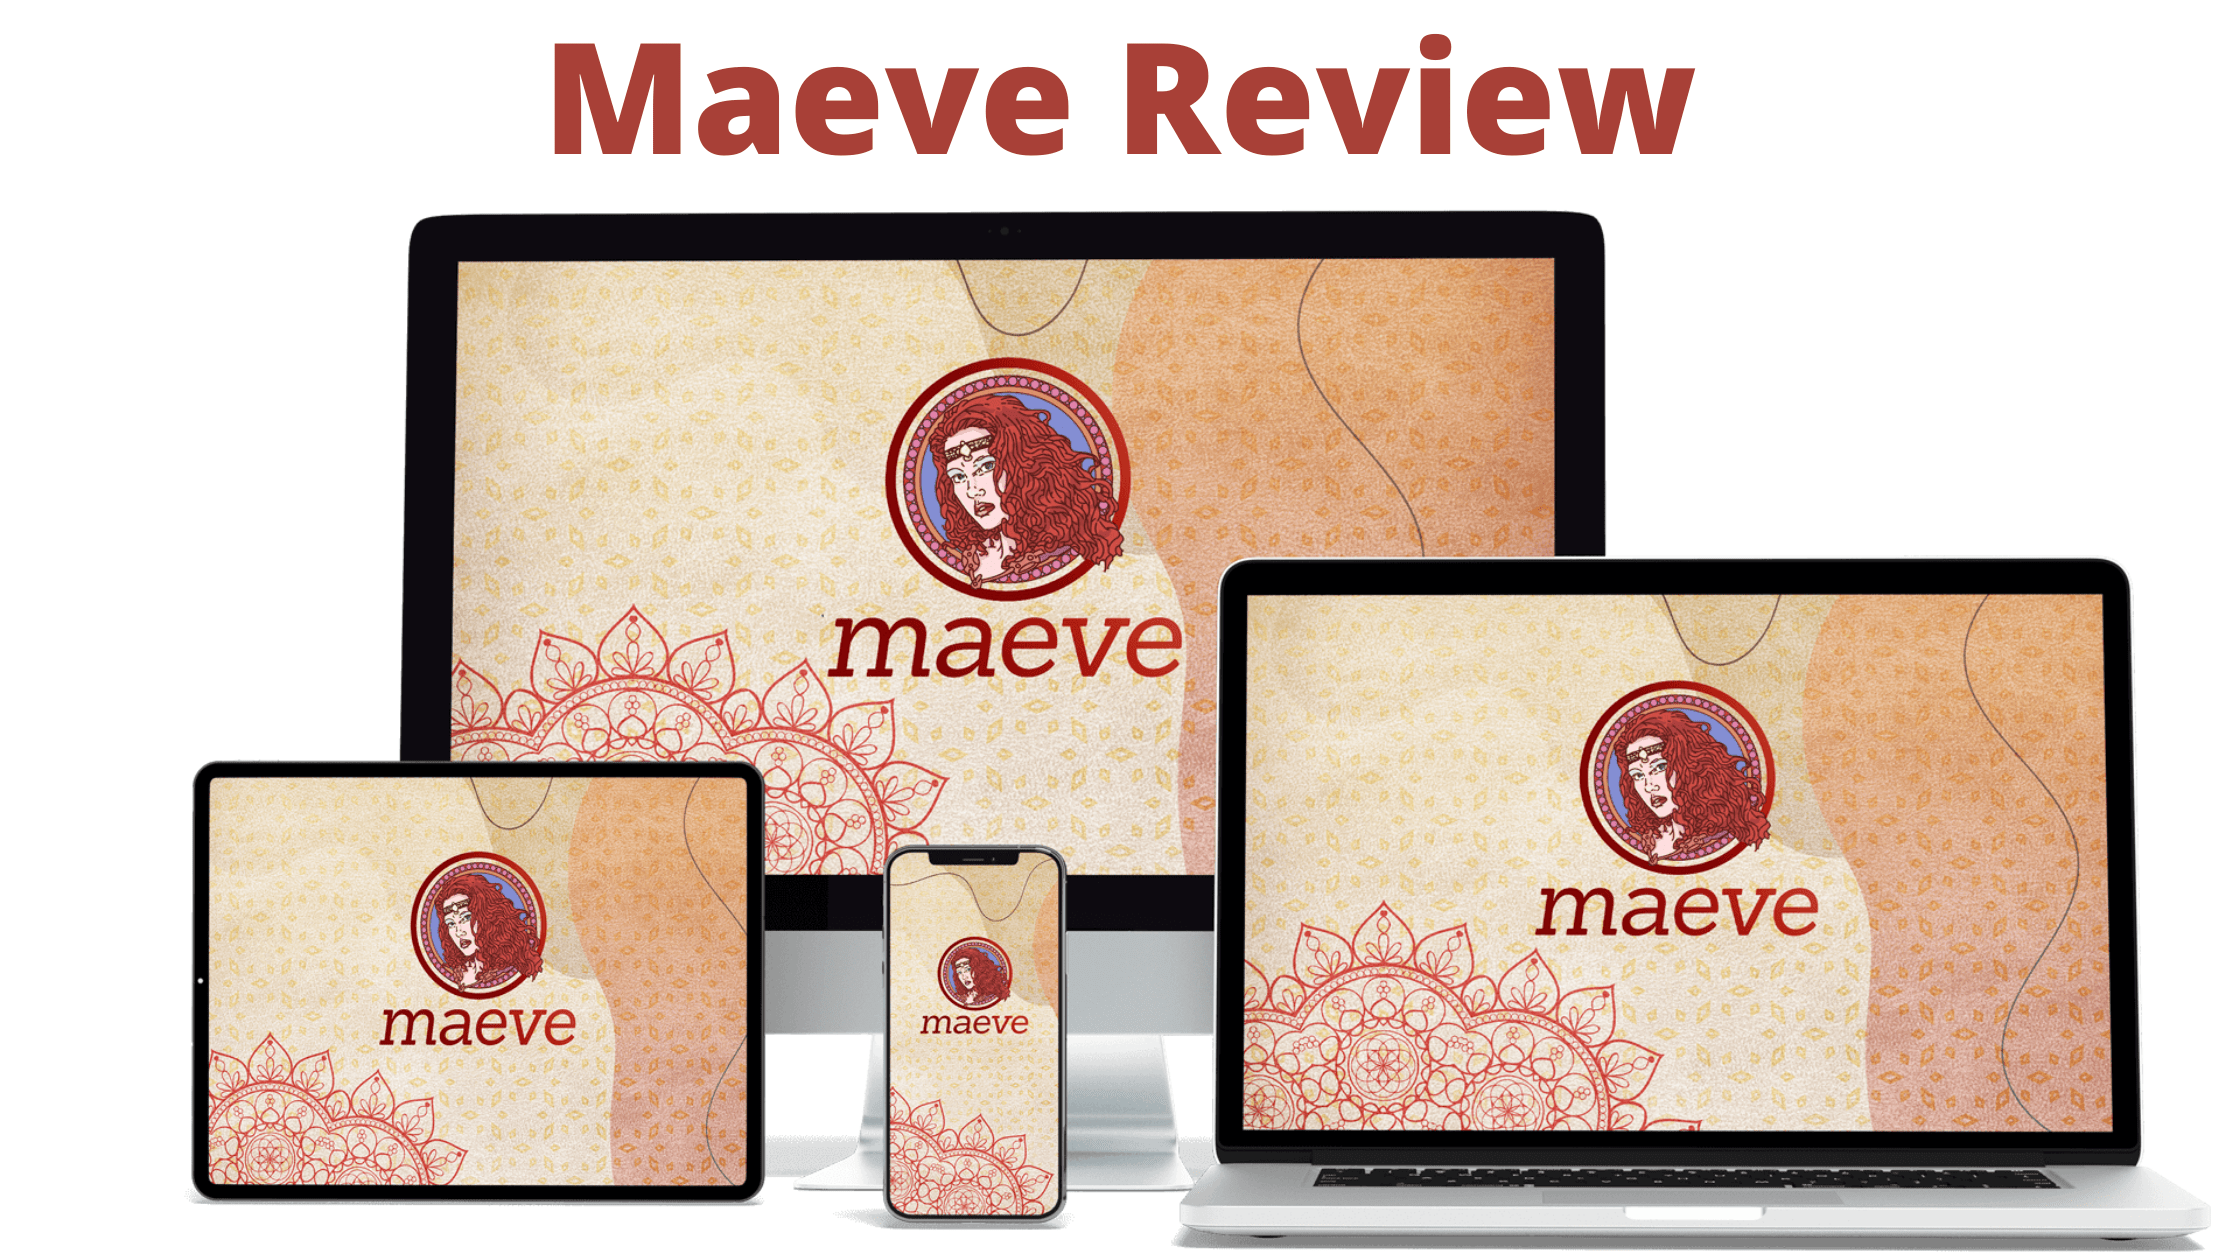 Maeve Review